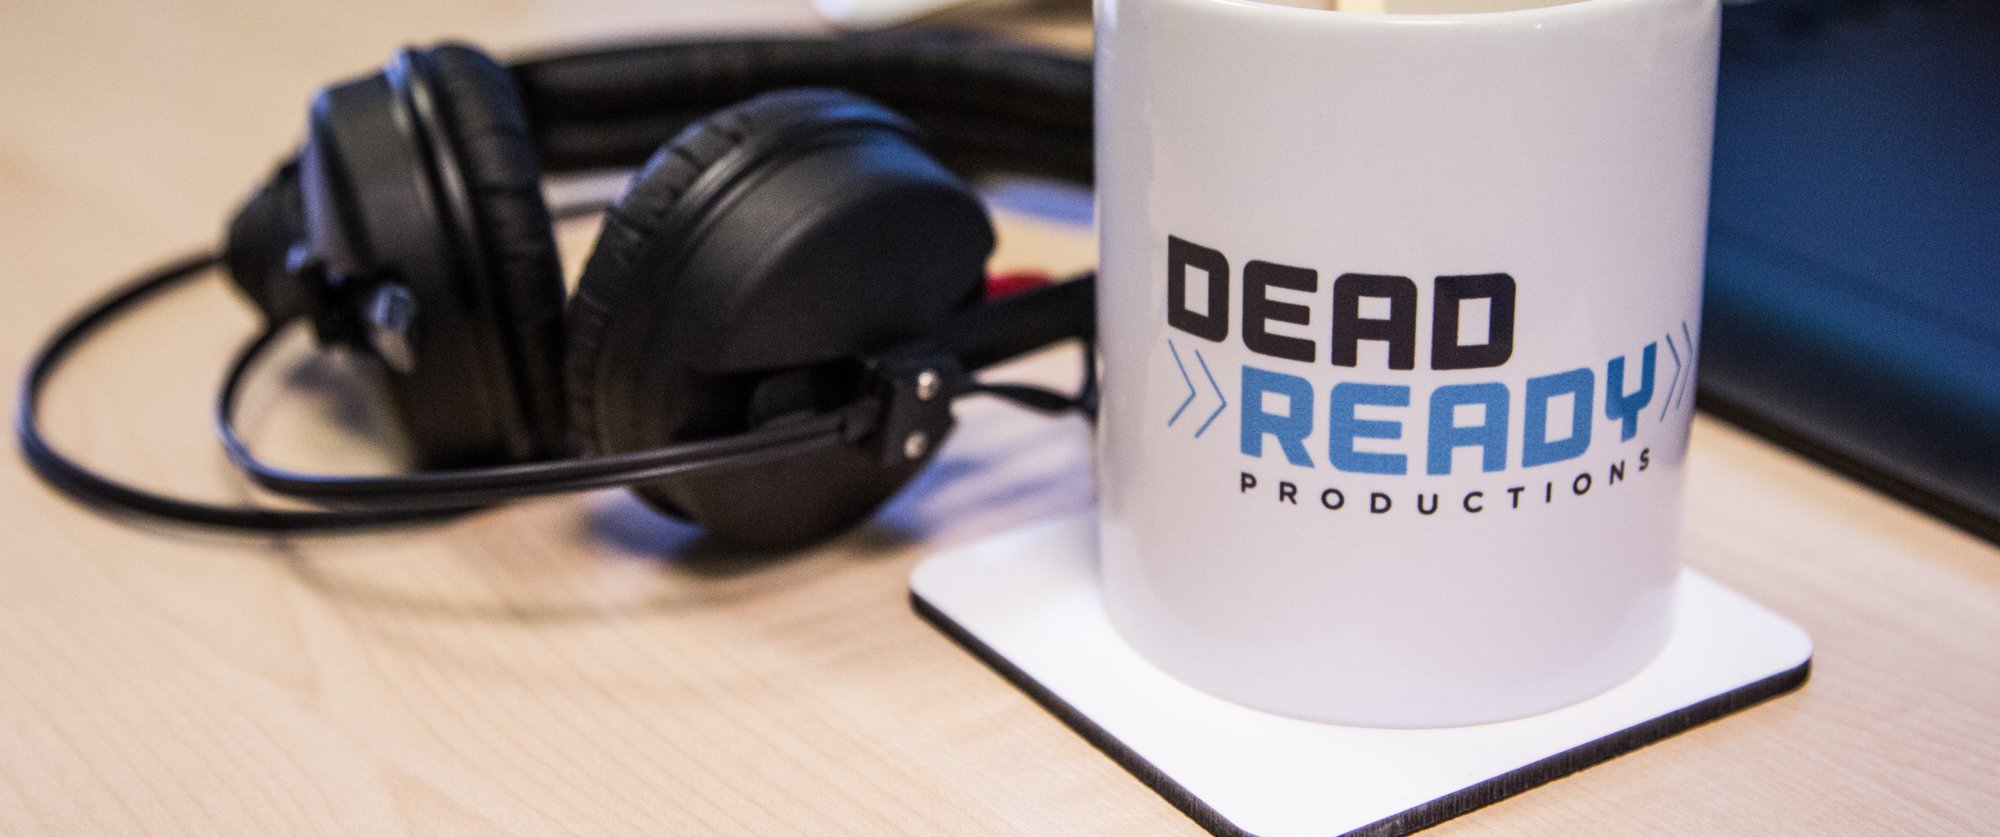 Dead Ready Productions